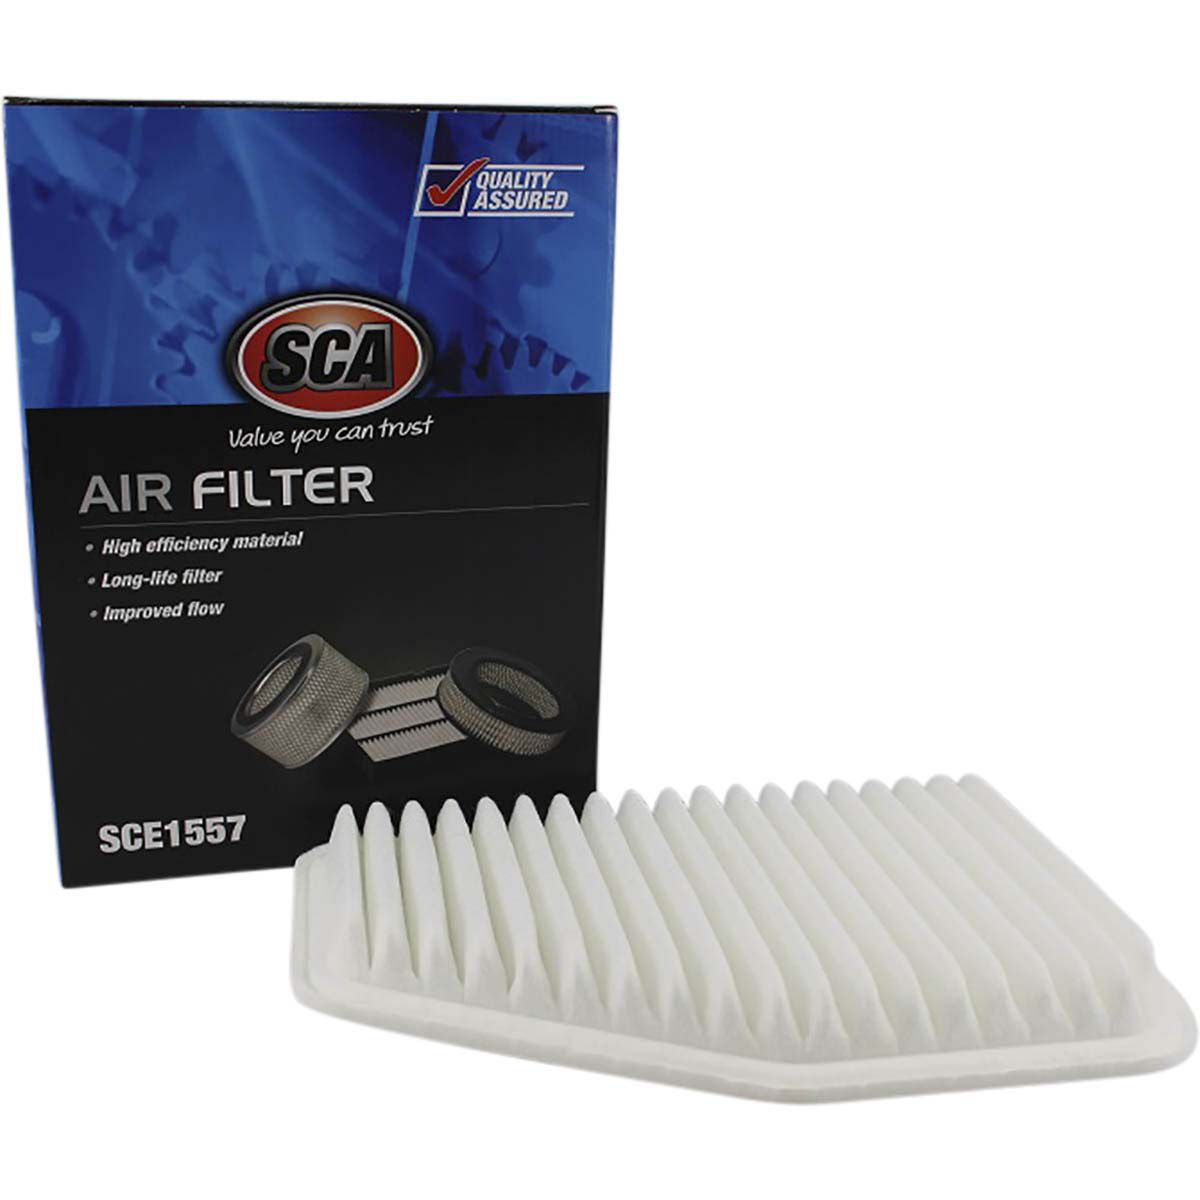 SCA Air Filter SCE1557 (Interchangeable with A1557), , scaau_hi-res